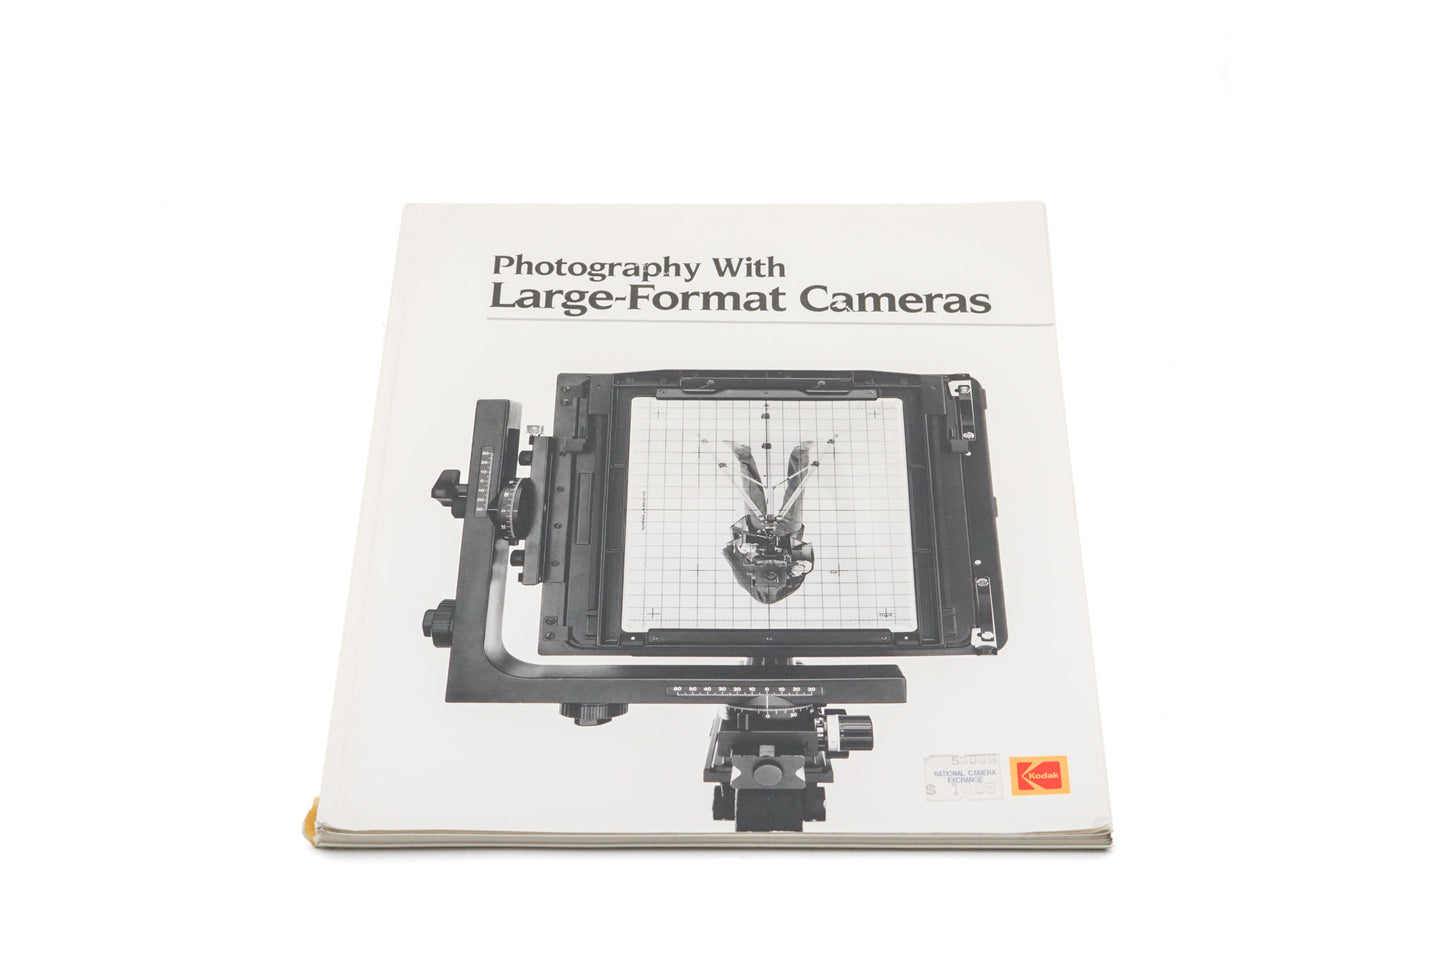 Kodak Photography with Large Format Cameras Booklet - Accessory